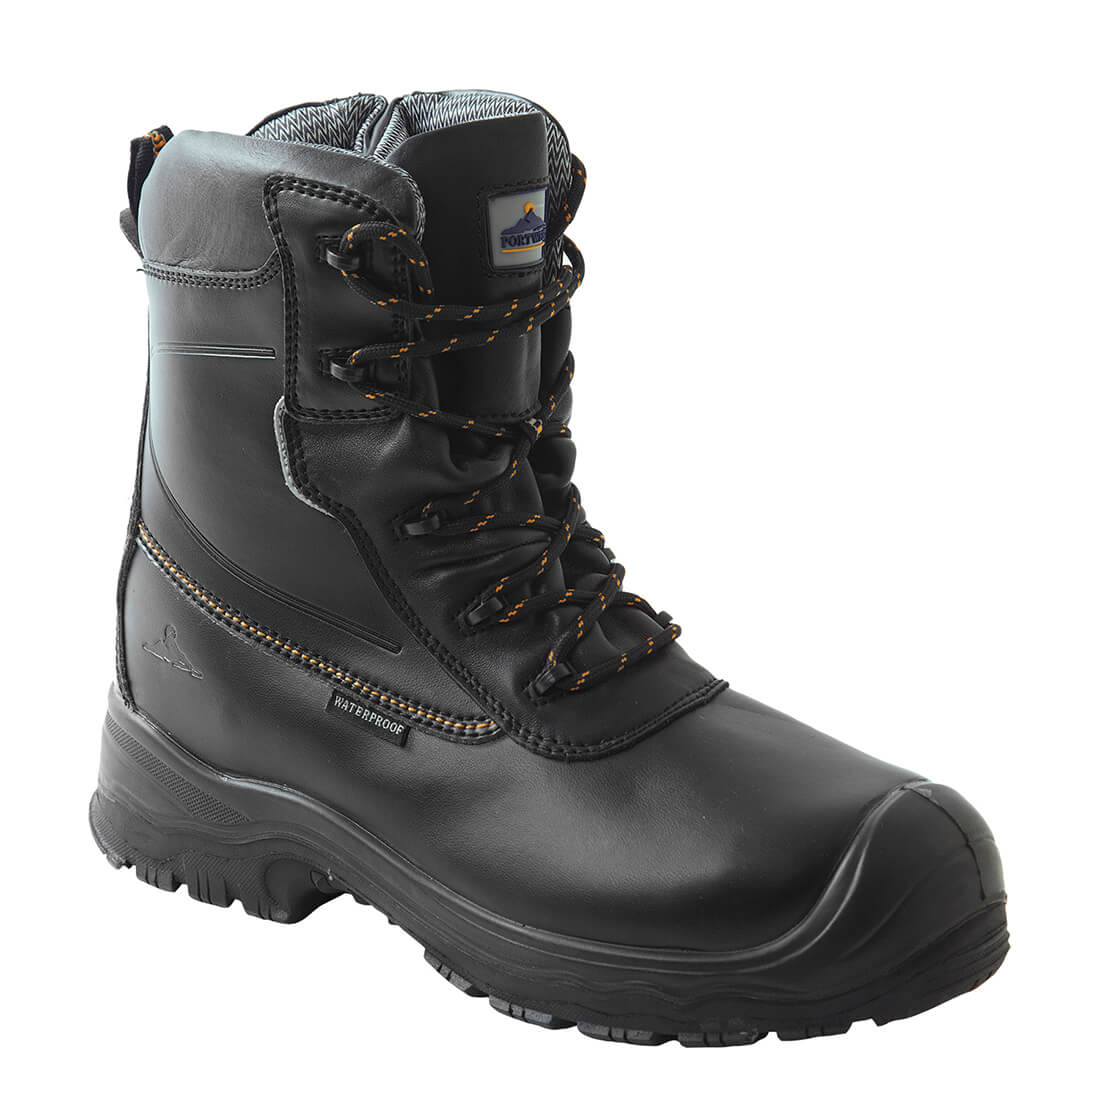 Image of Portwest Mens Compositelite Traction Safety Boots Black Size 7